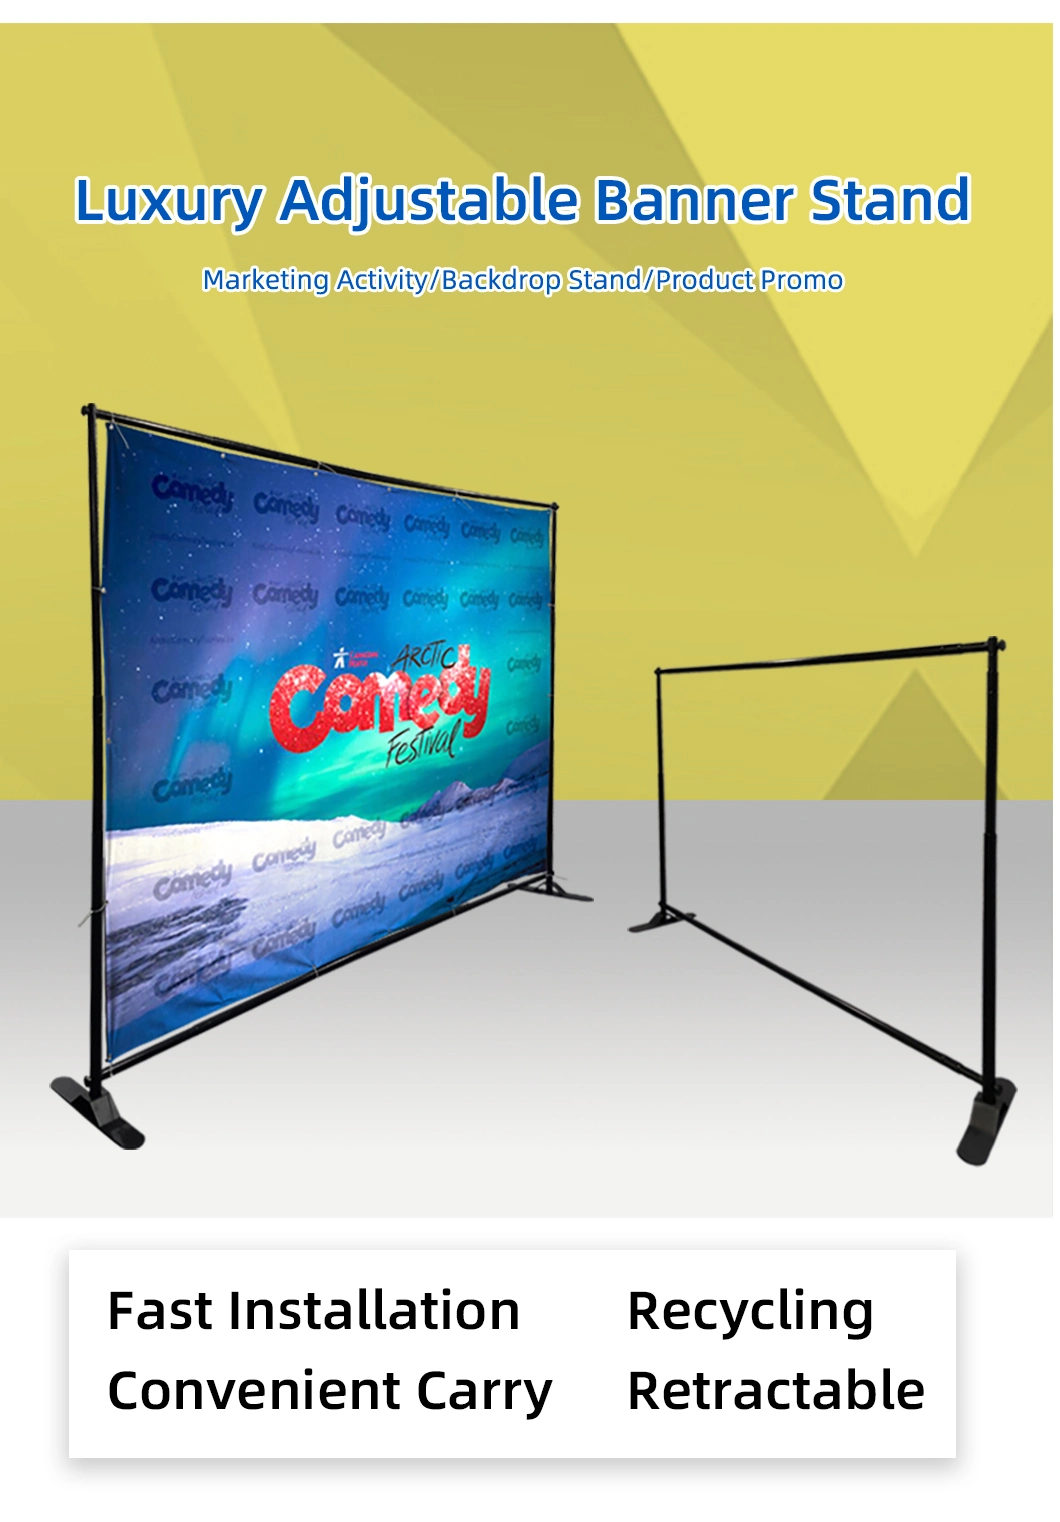 8' X 8' Adjustable Telescopic Display Backdrop Stand Step and Repeat for Trade Show, Photo Booth, Wall Exhibitor Background with Carrying Bag